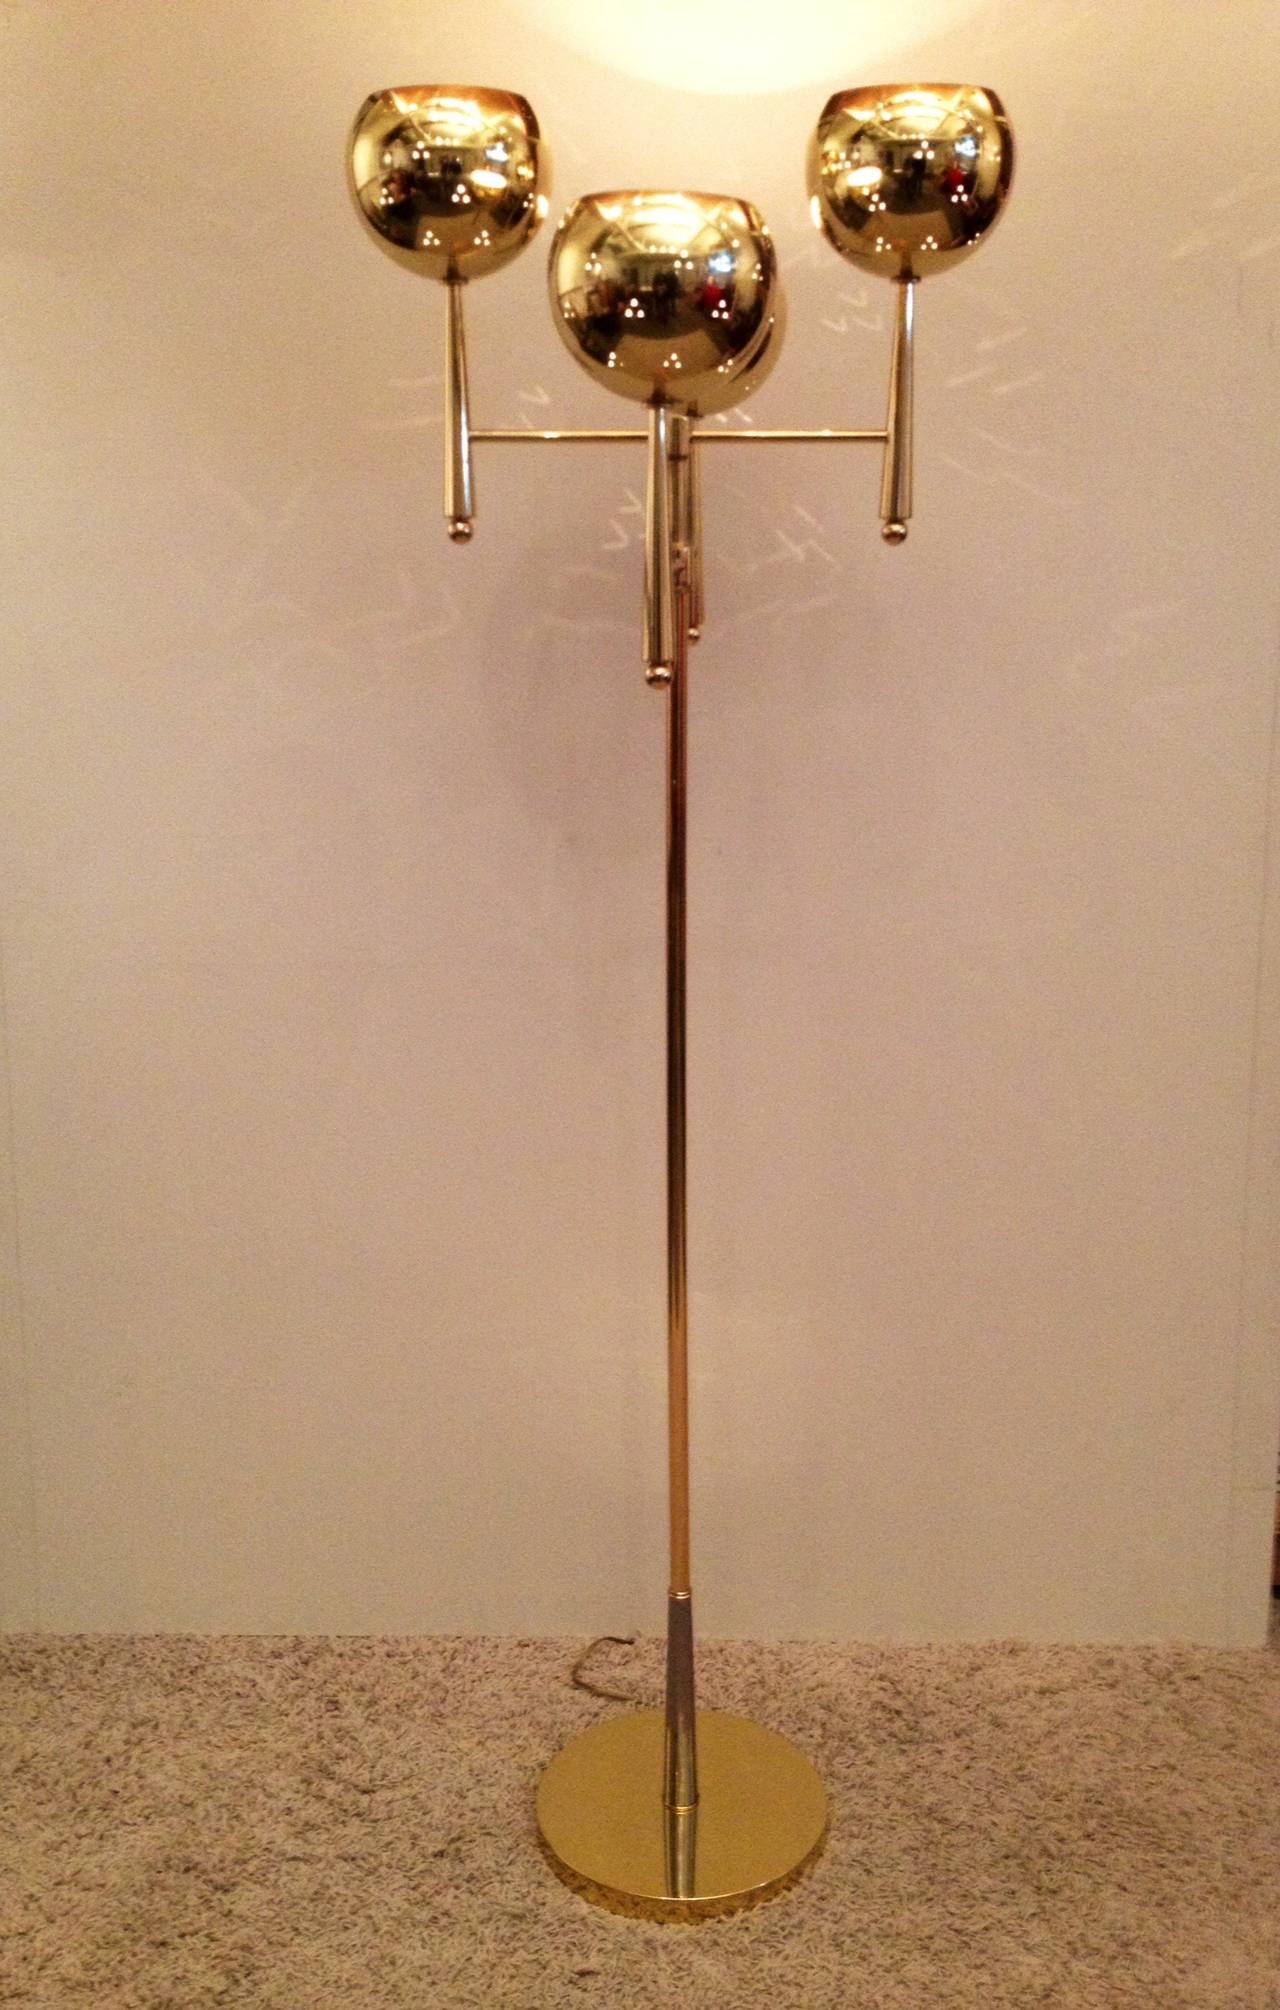 High quality In the Style Stilnovo solid brass standing lamp with four bulbous pierced shades. With touch pole censer for on and off and dimmer.

Base measures 11.50 round.